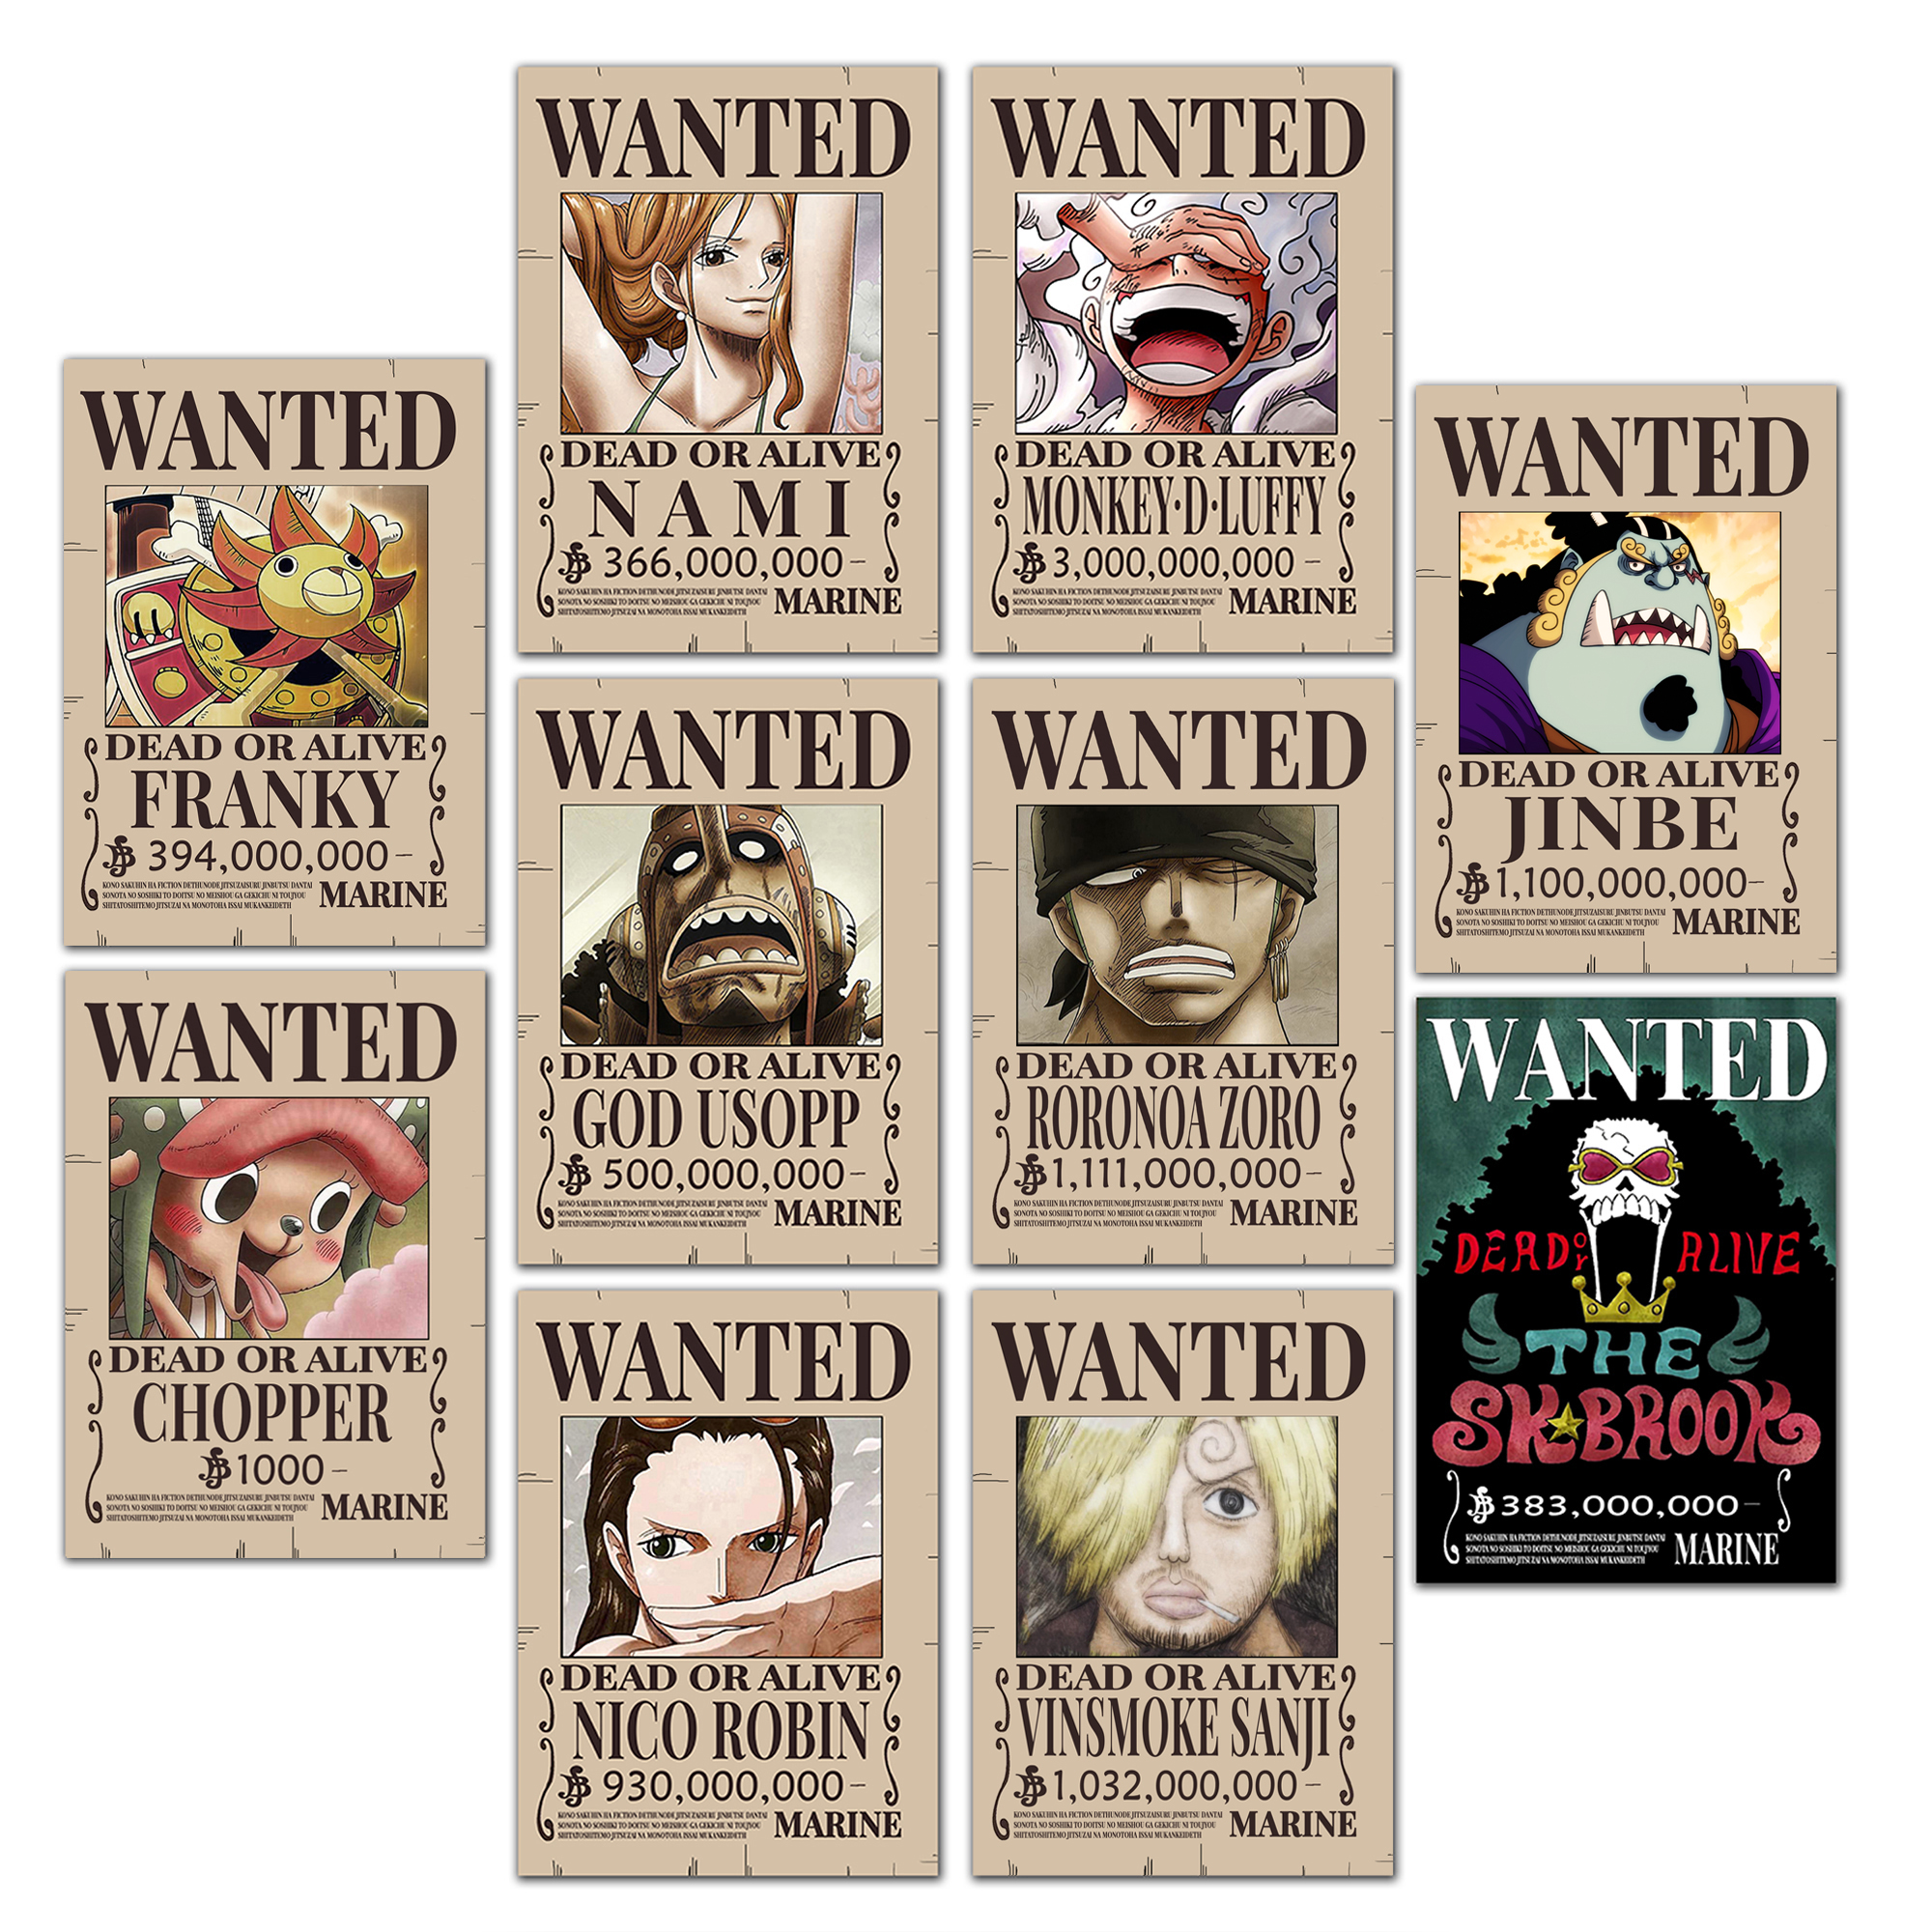 Buy one piece wanted poster online